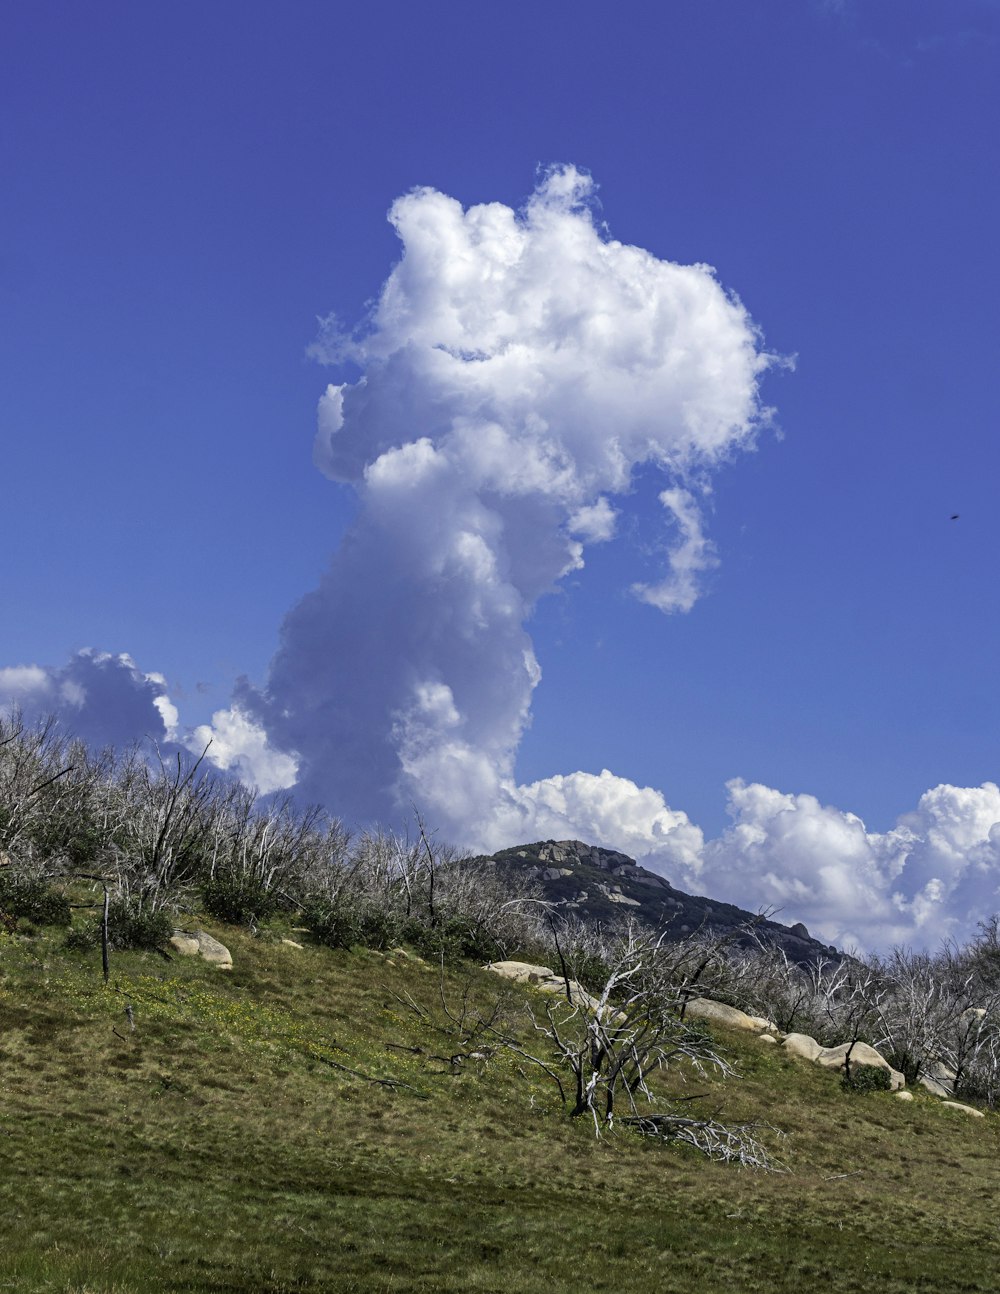 a large cloud of smoke rises above a grassy hill